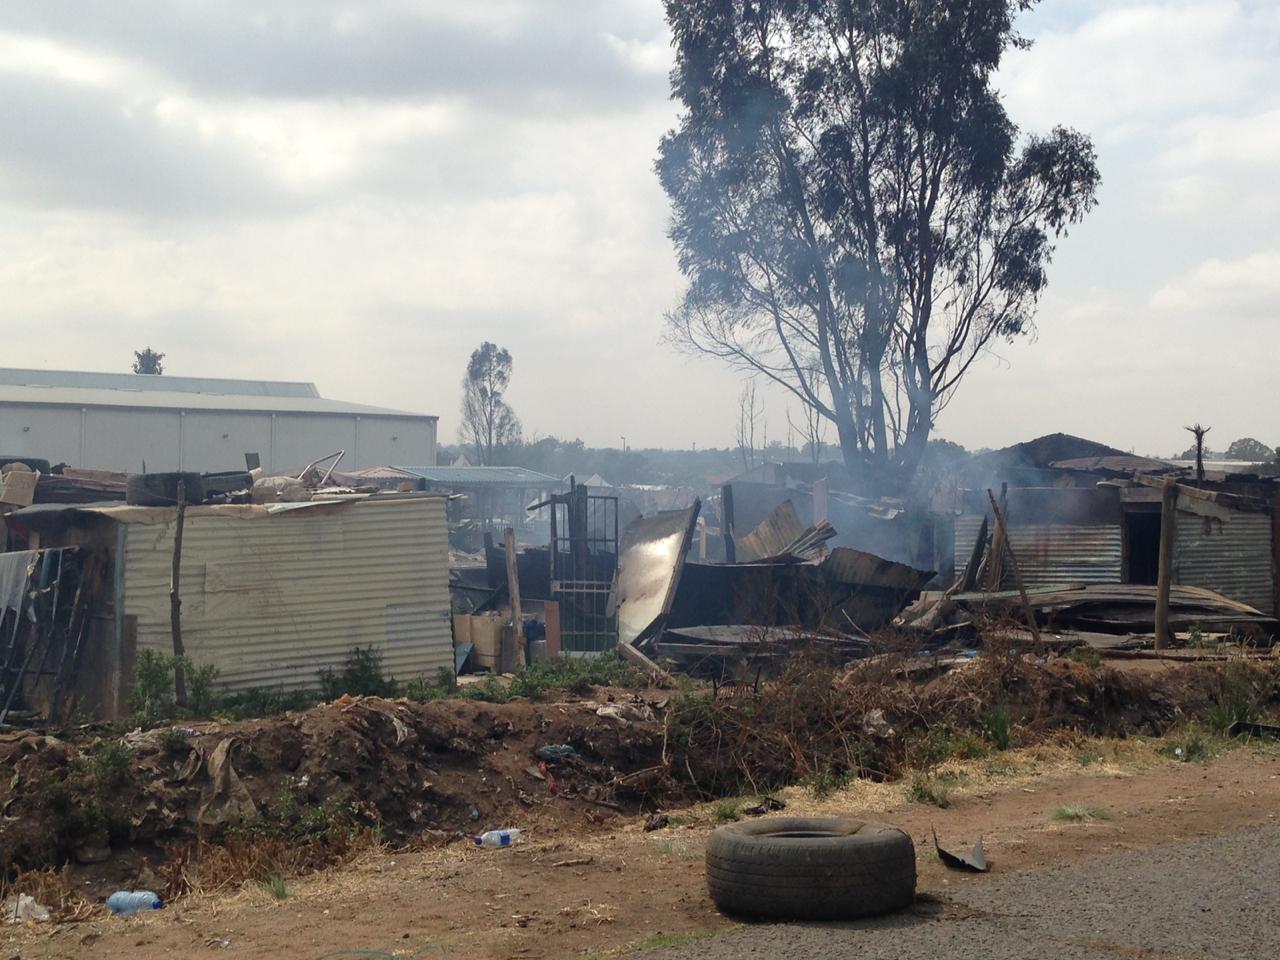 Over 250 shacks at the Pomona informal settlement were destroyed by the blaze caused by an unattended gas stove